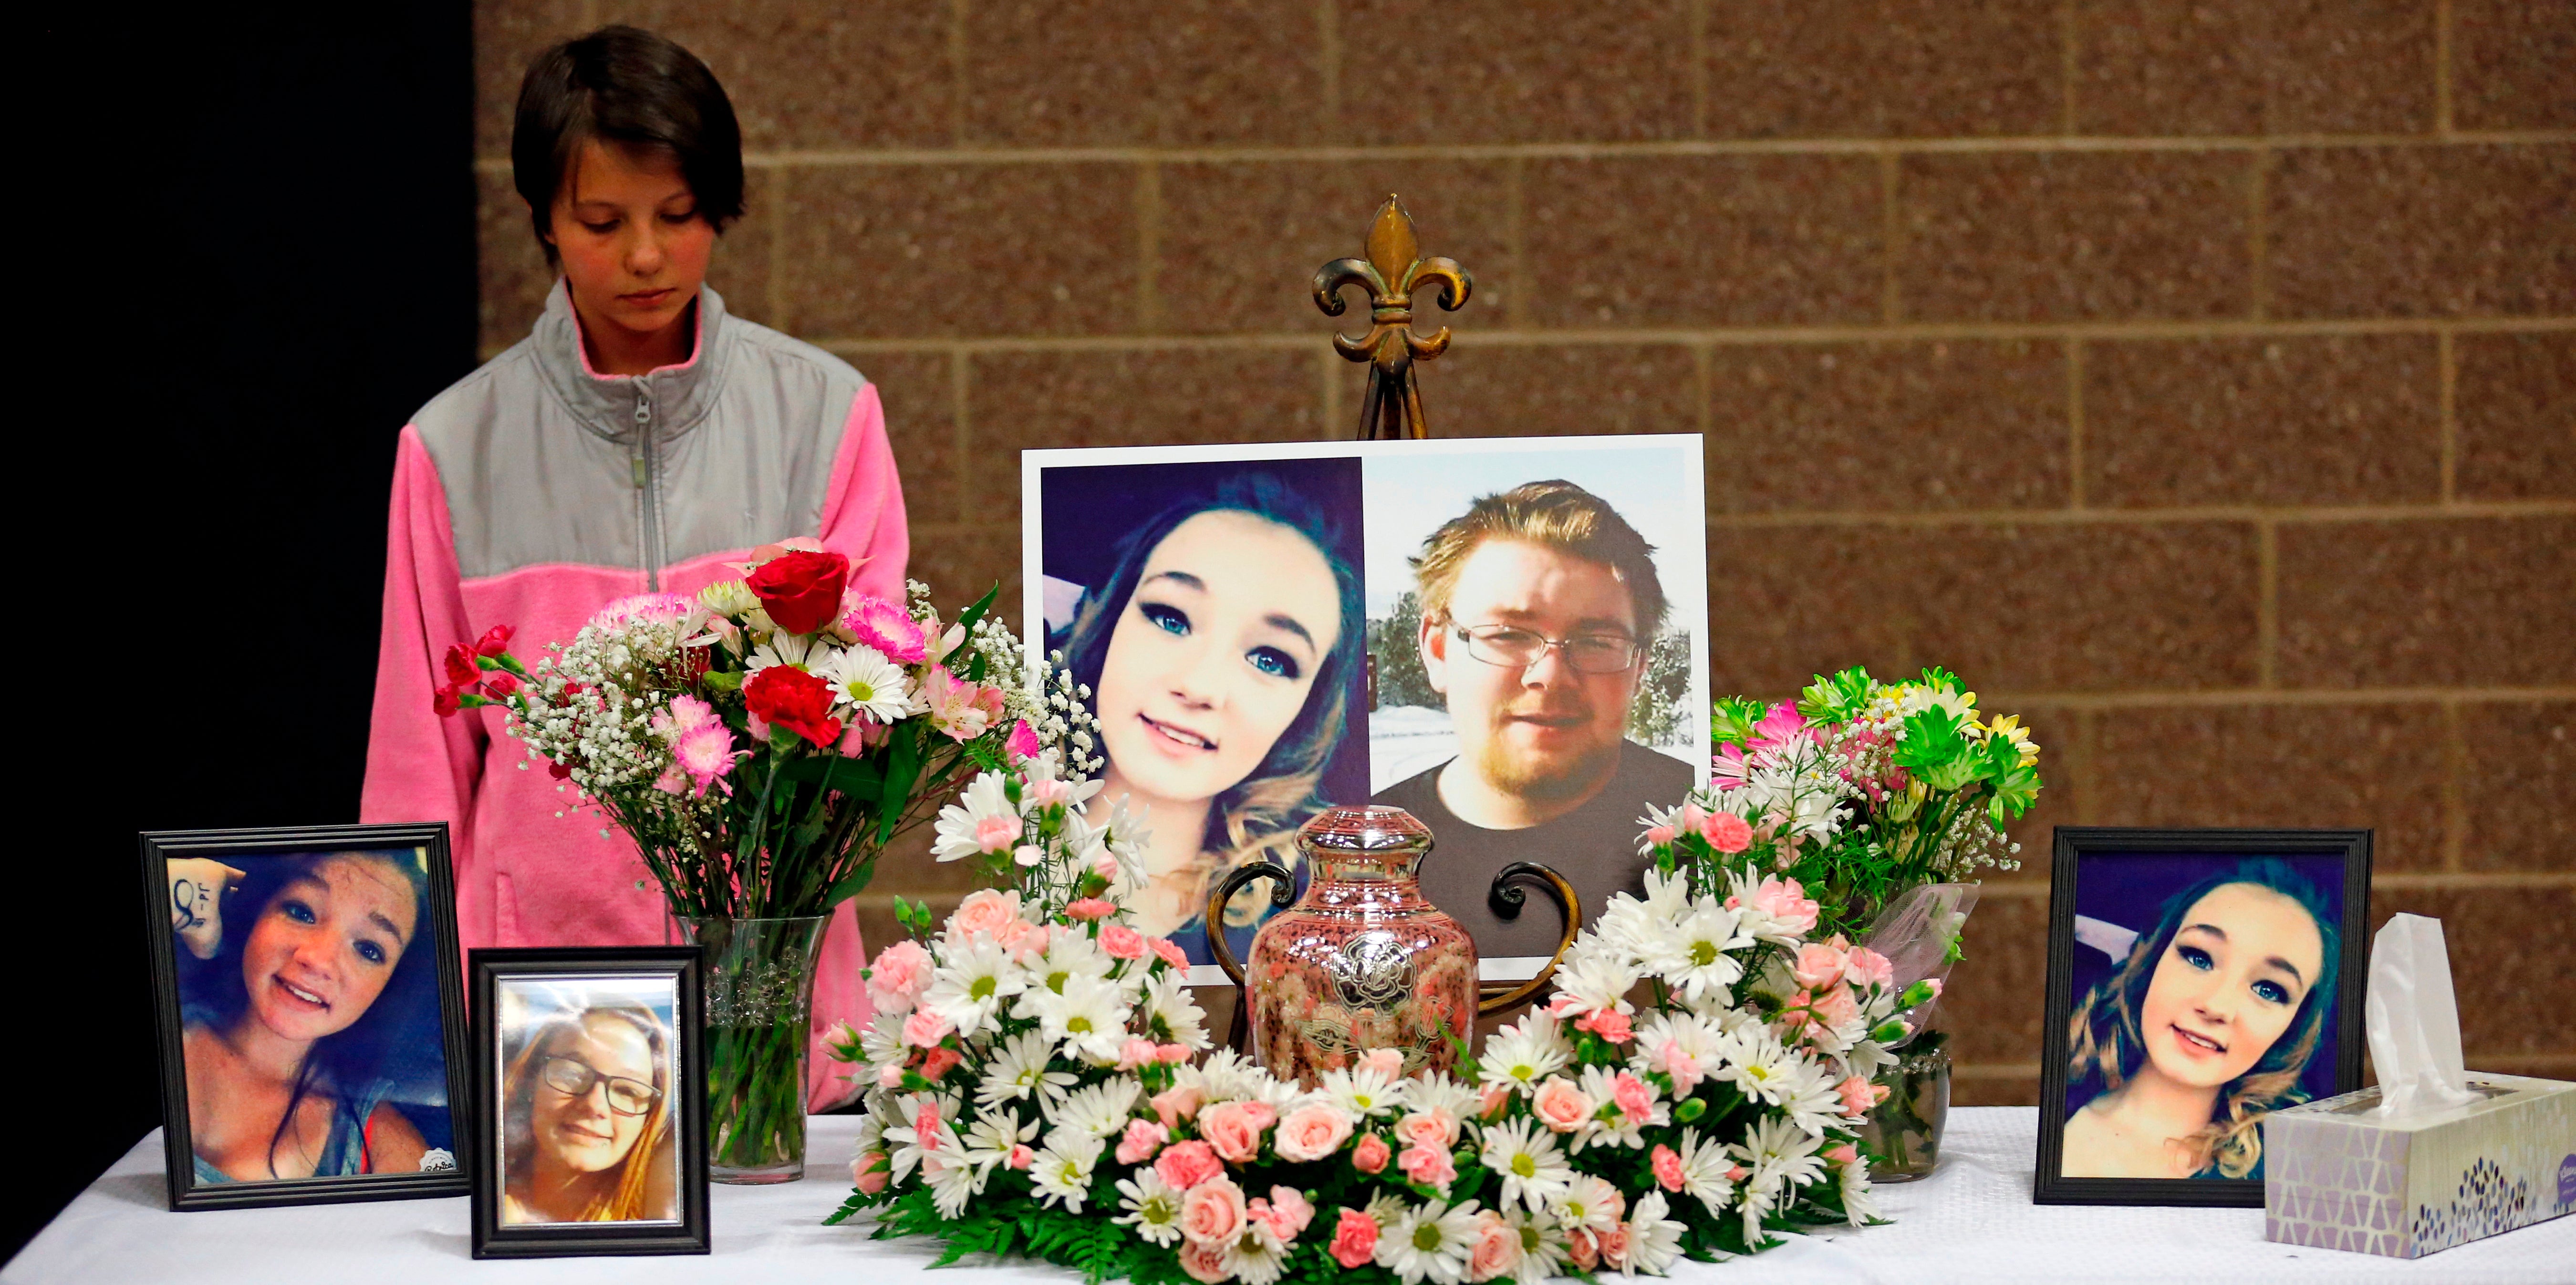 A funeral service in April 2018, for Brelynne “Breezy” Otteson, 17, and boyfriend Riley Powell, 18, in Eureka, Utah